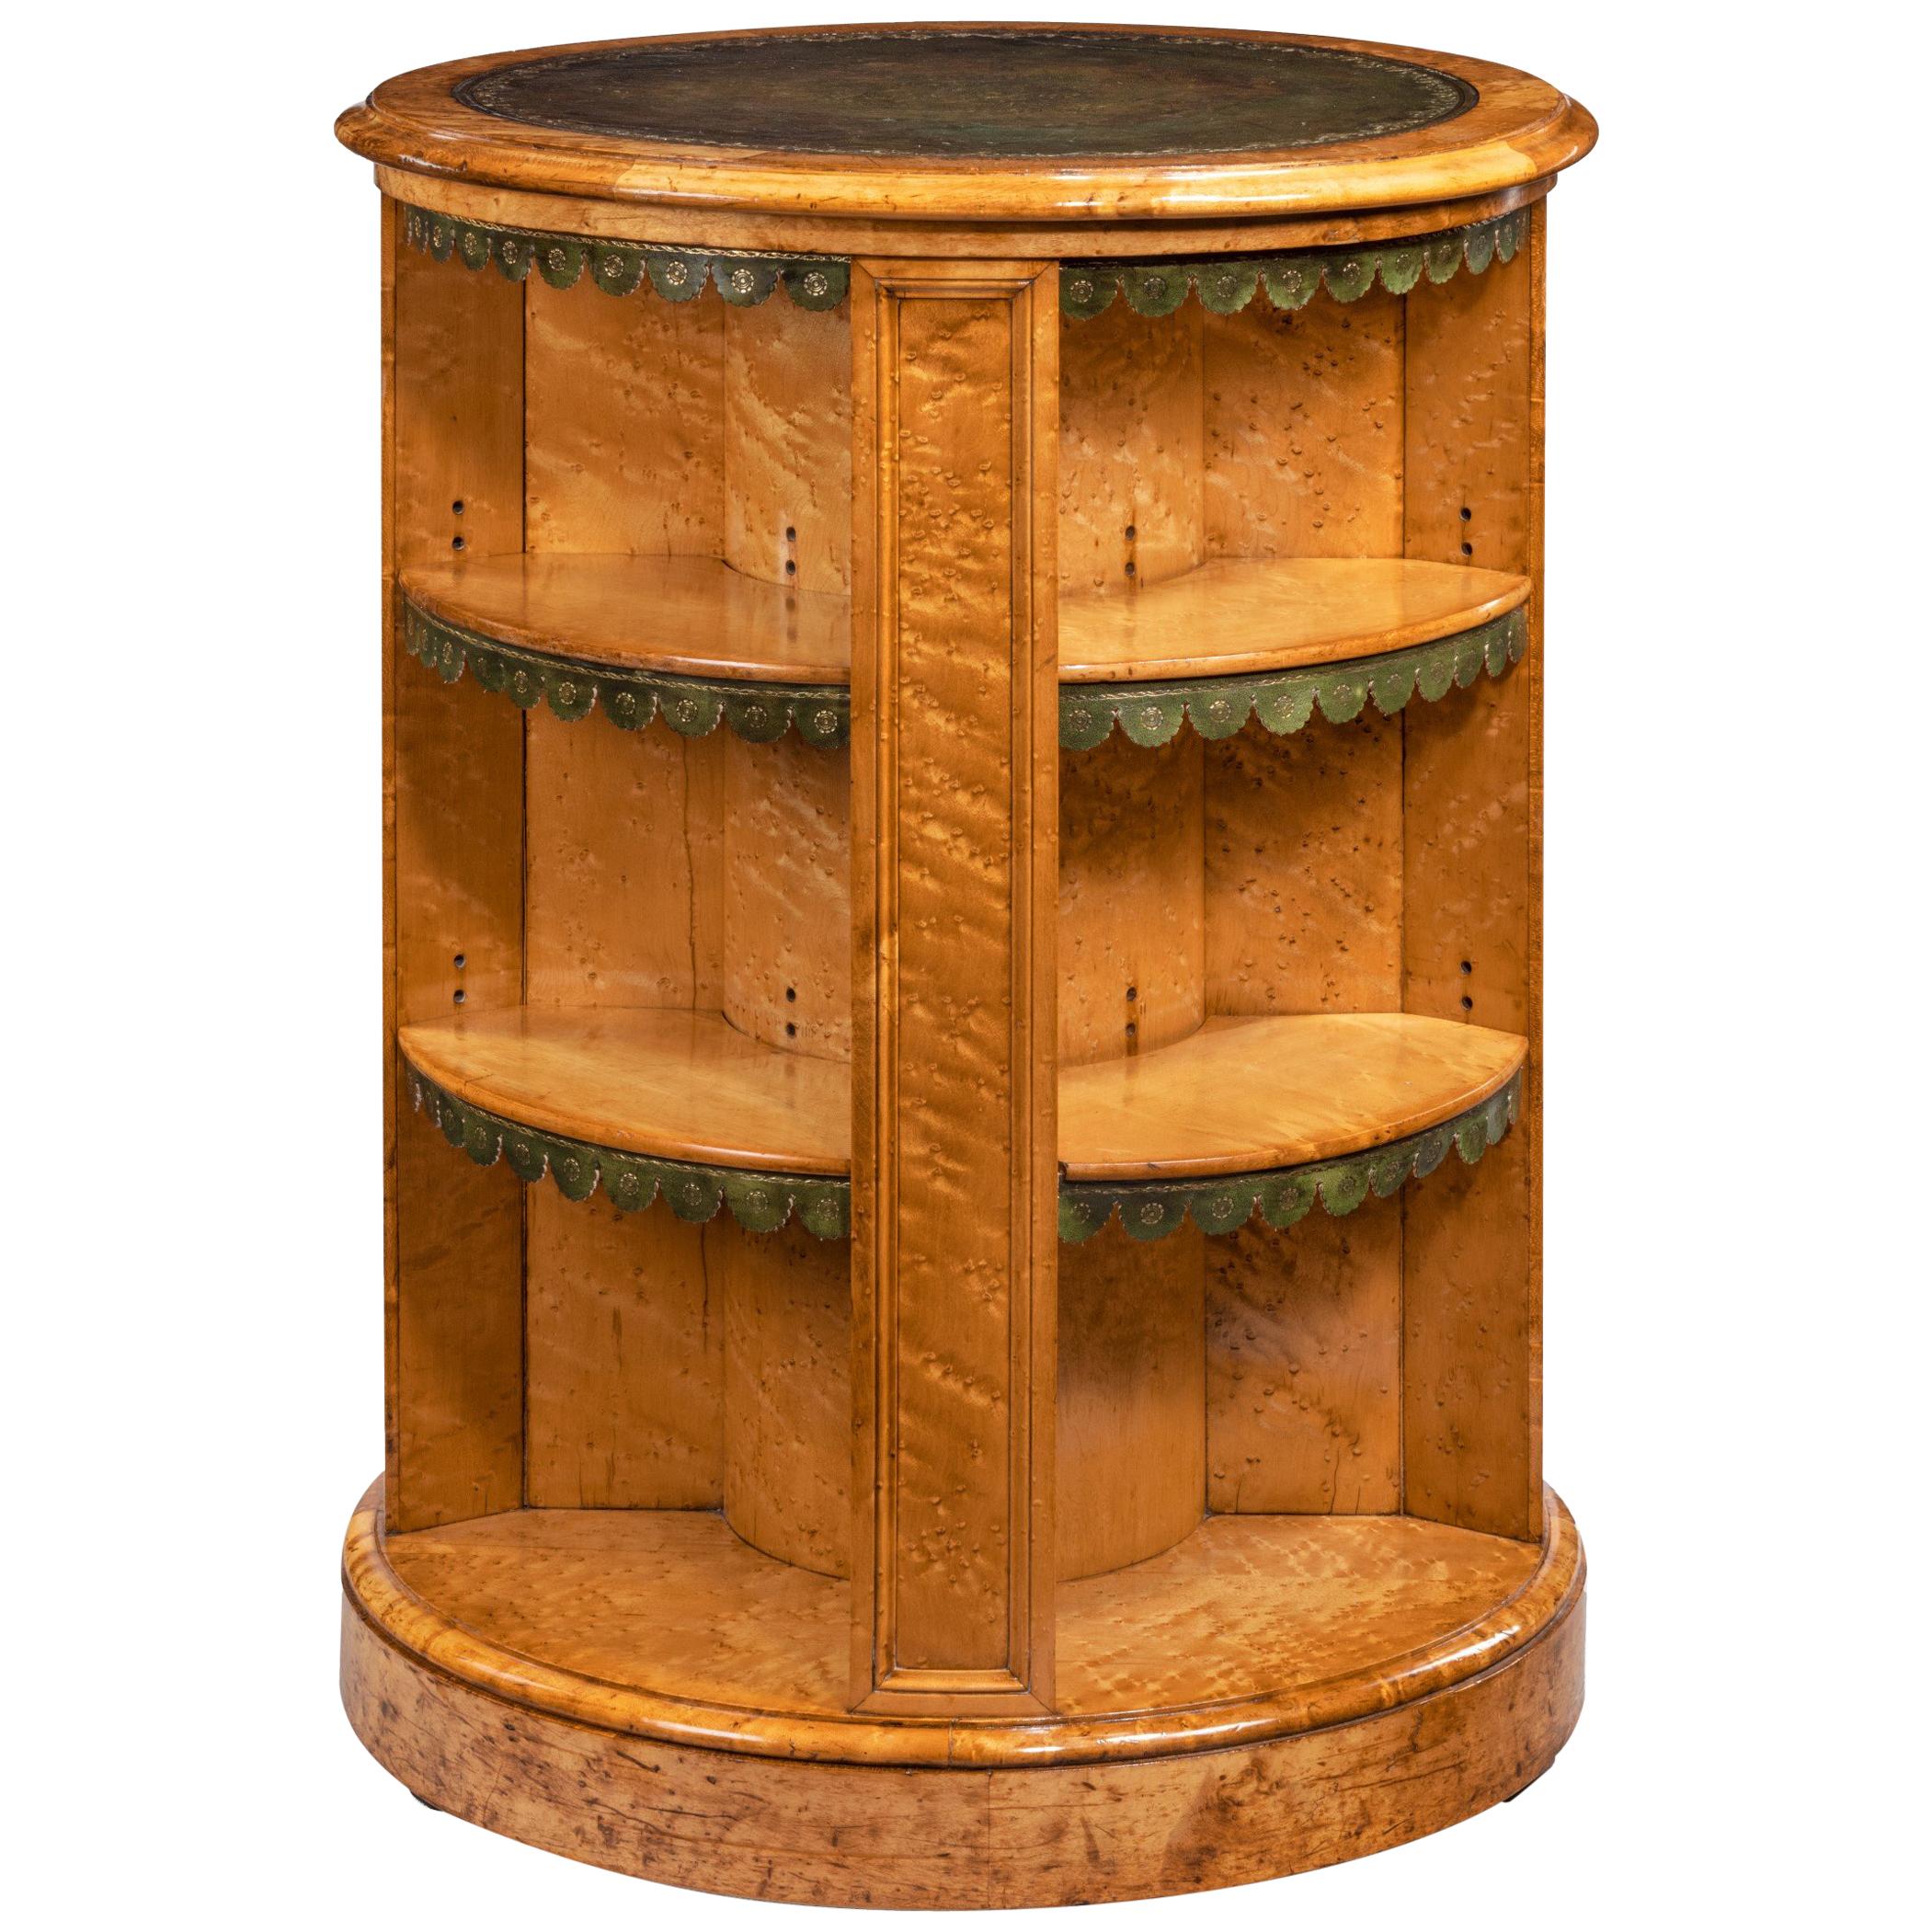 Late Regency Bird’s-Eye Maple Cylindrical Open Bookcase Attributed to Gillows